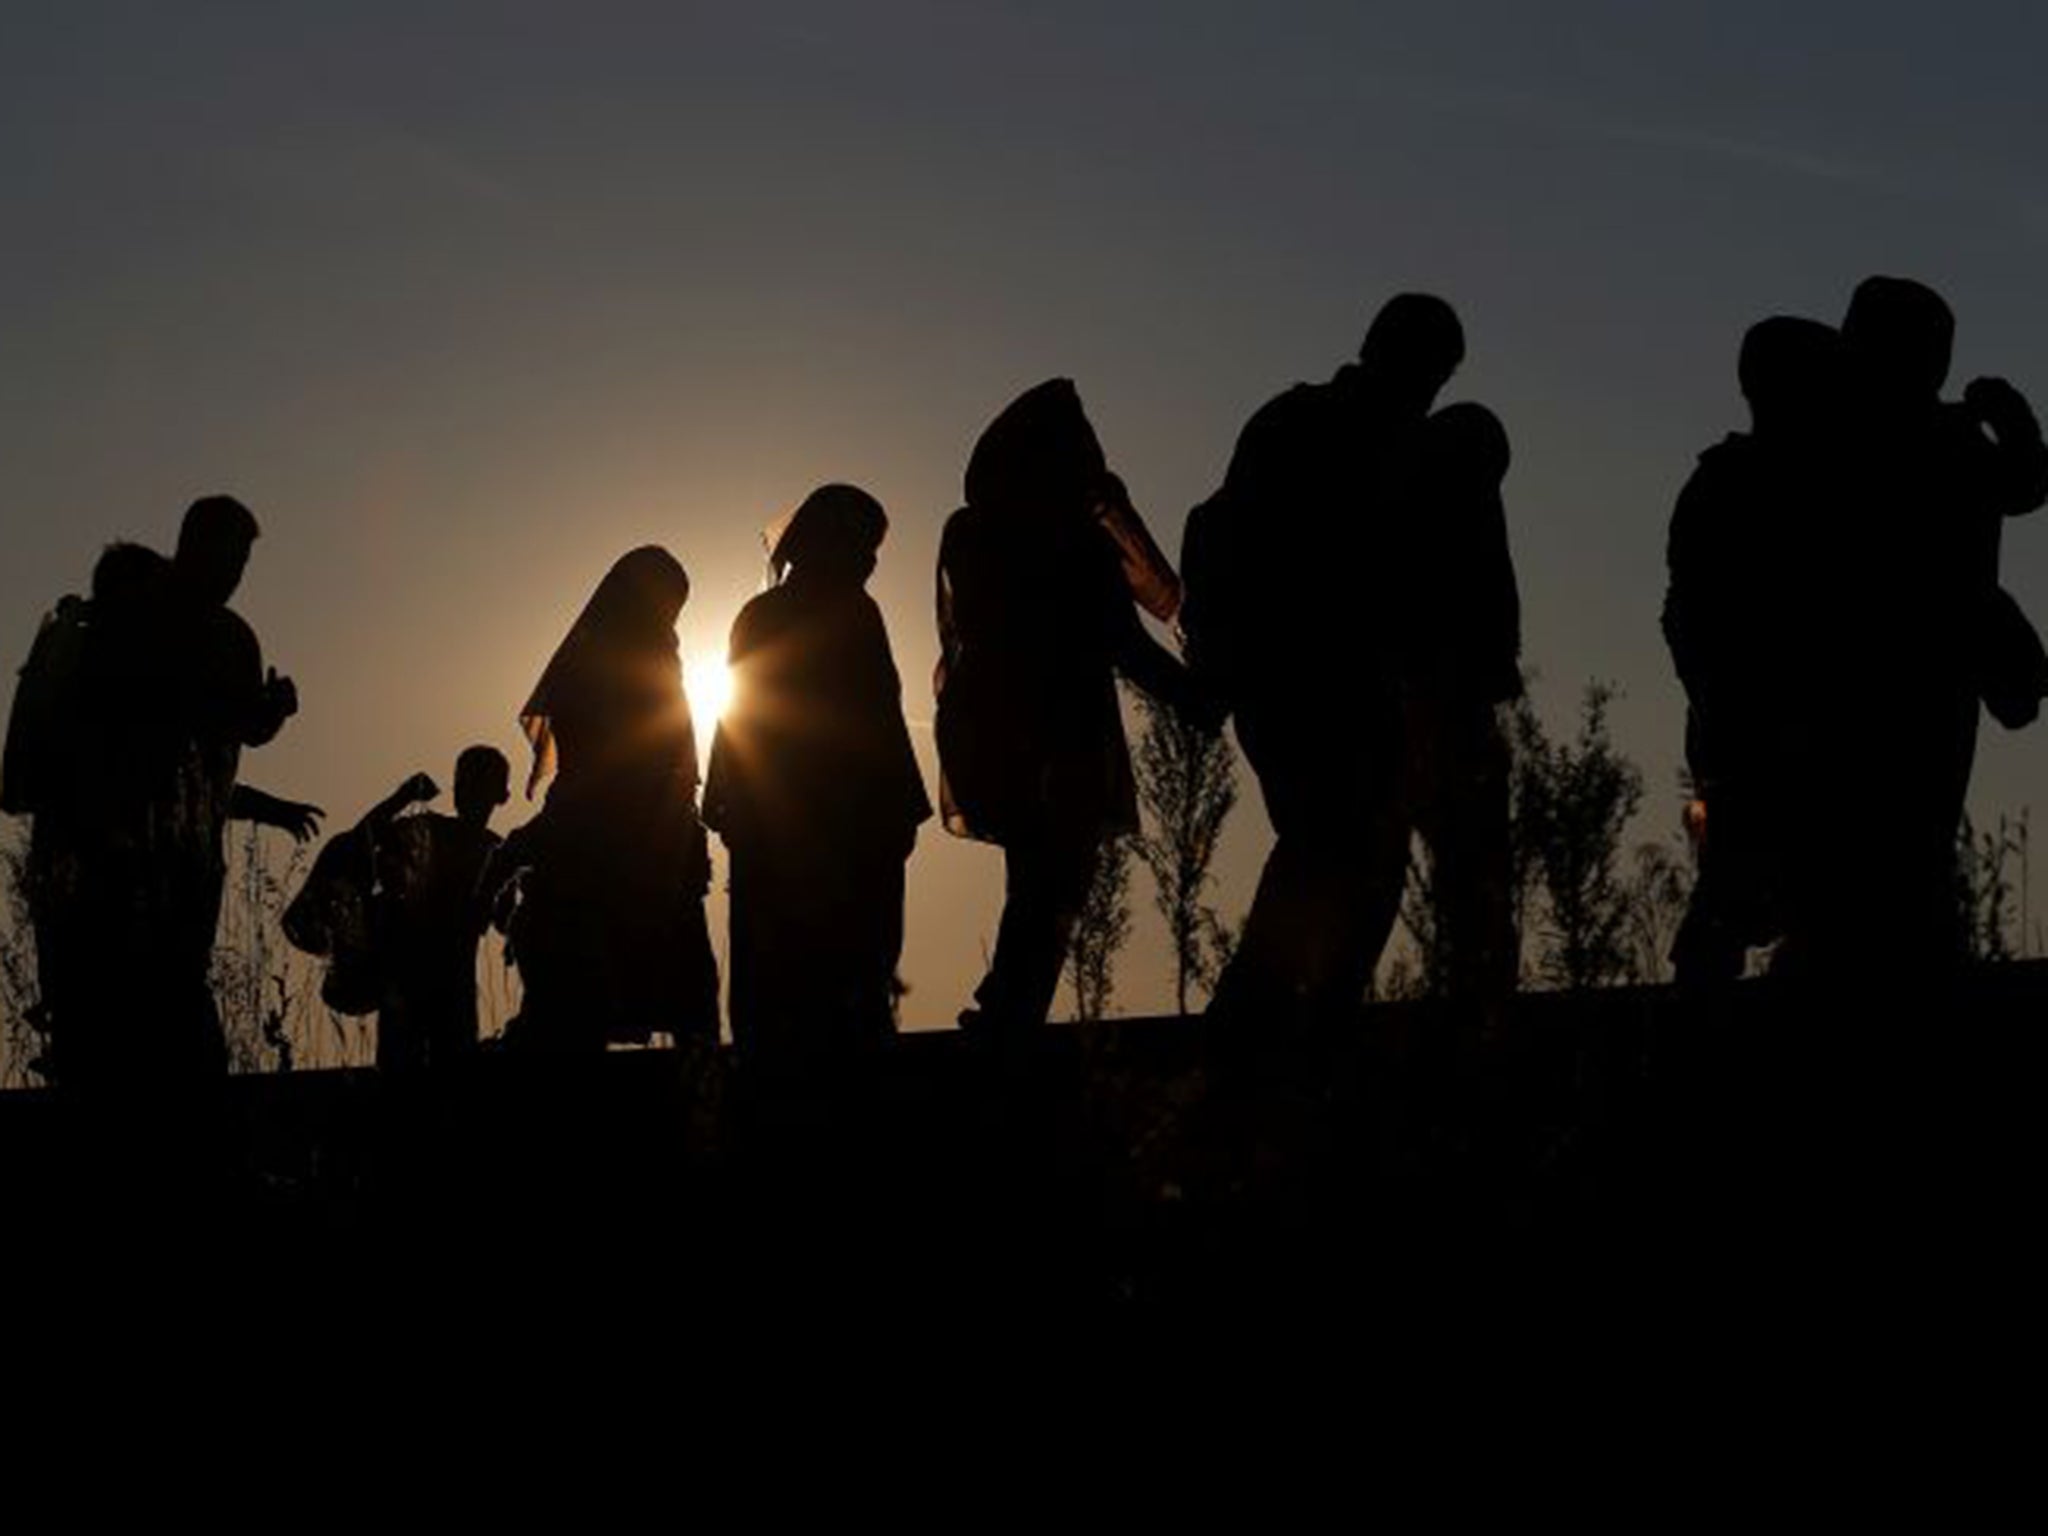 More than 378,000 people have entered Europe this year,according to the International Organisation for Migration